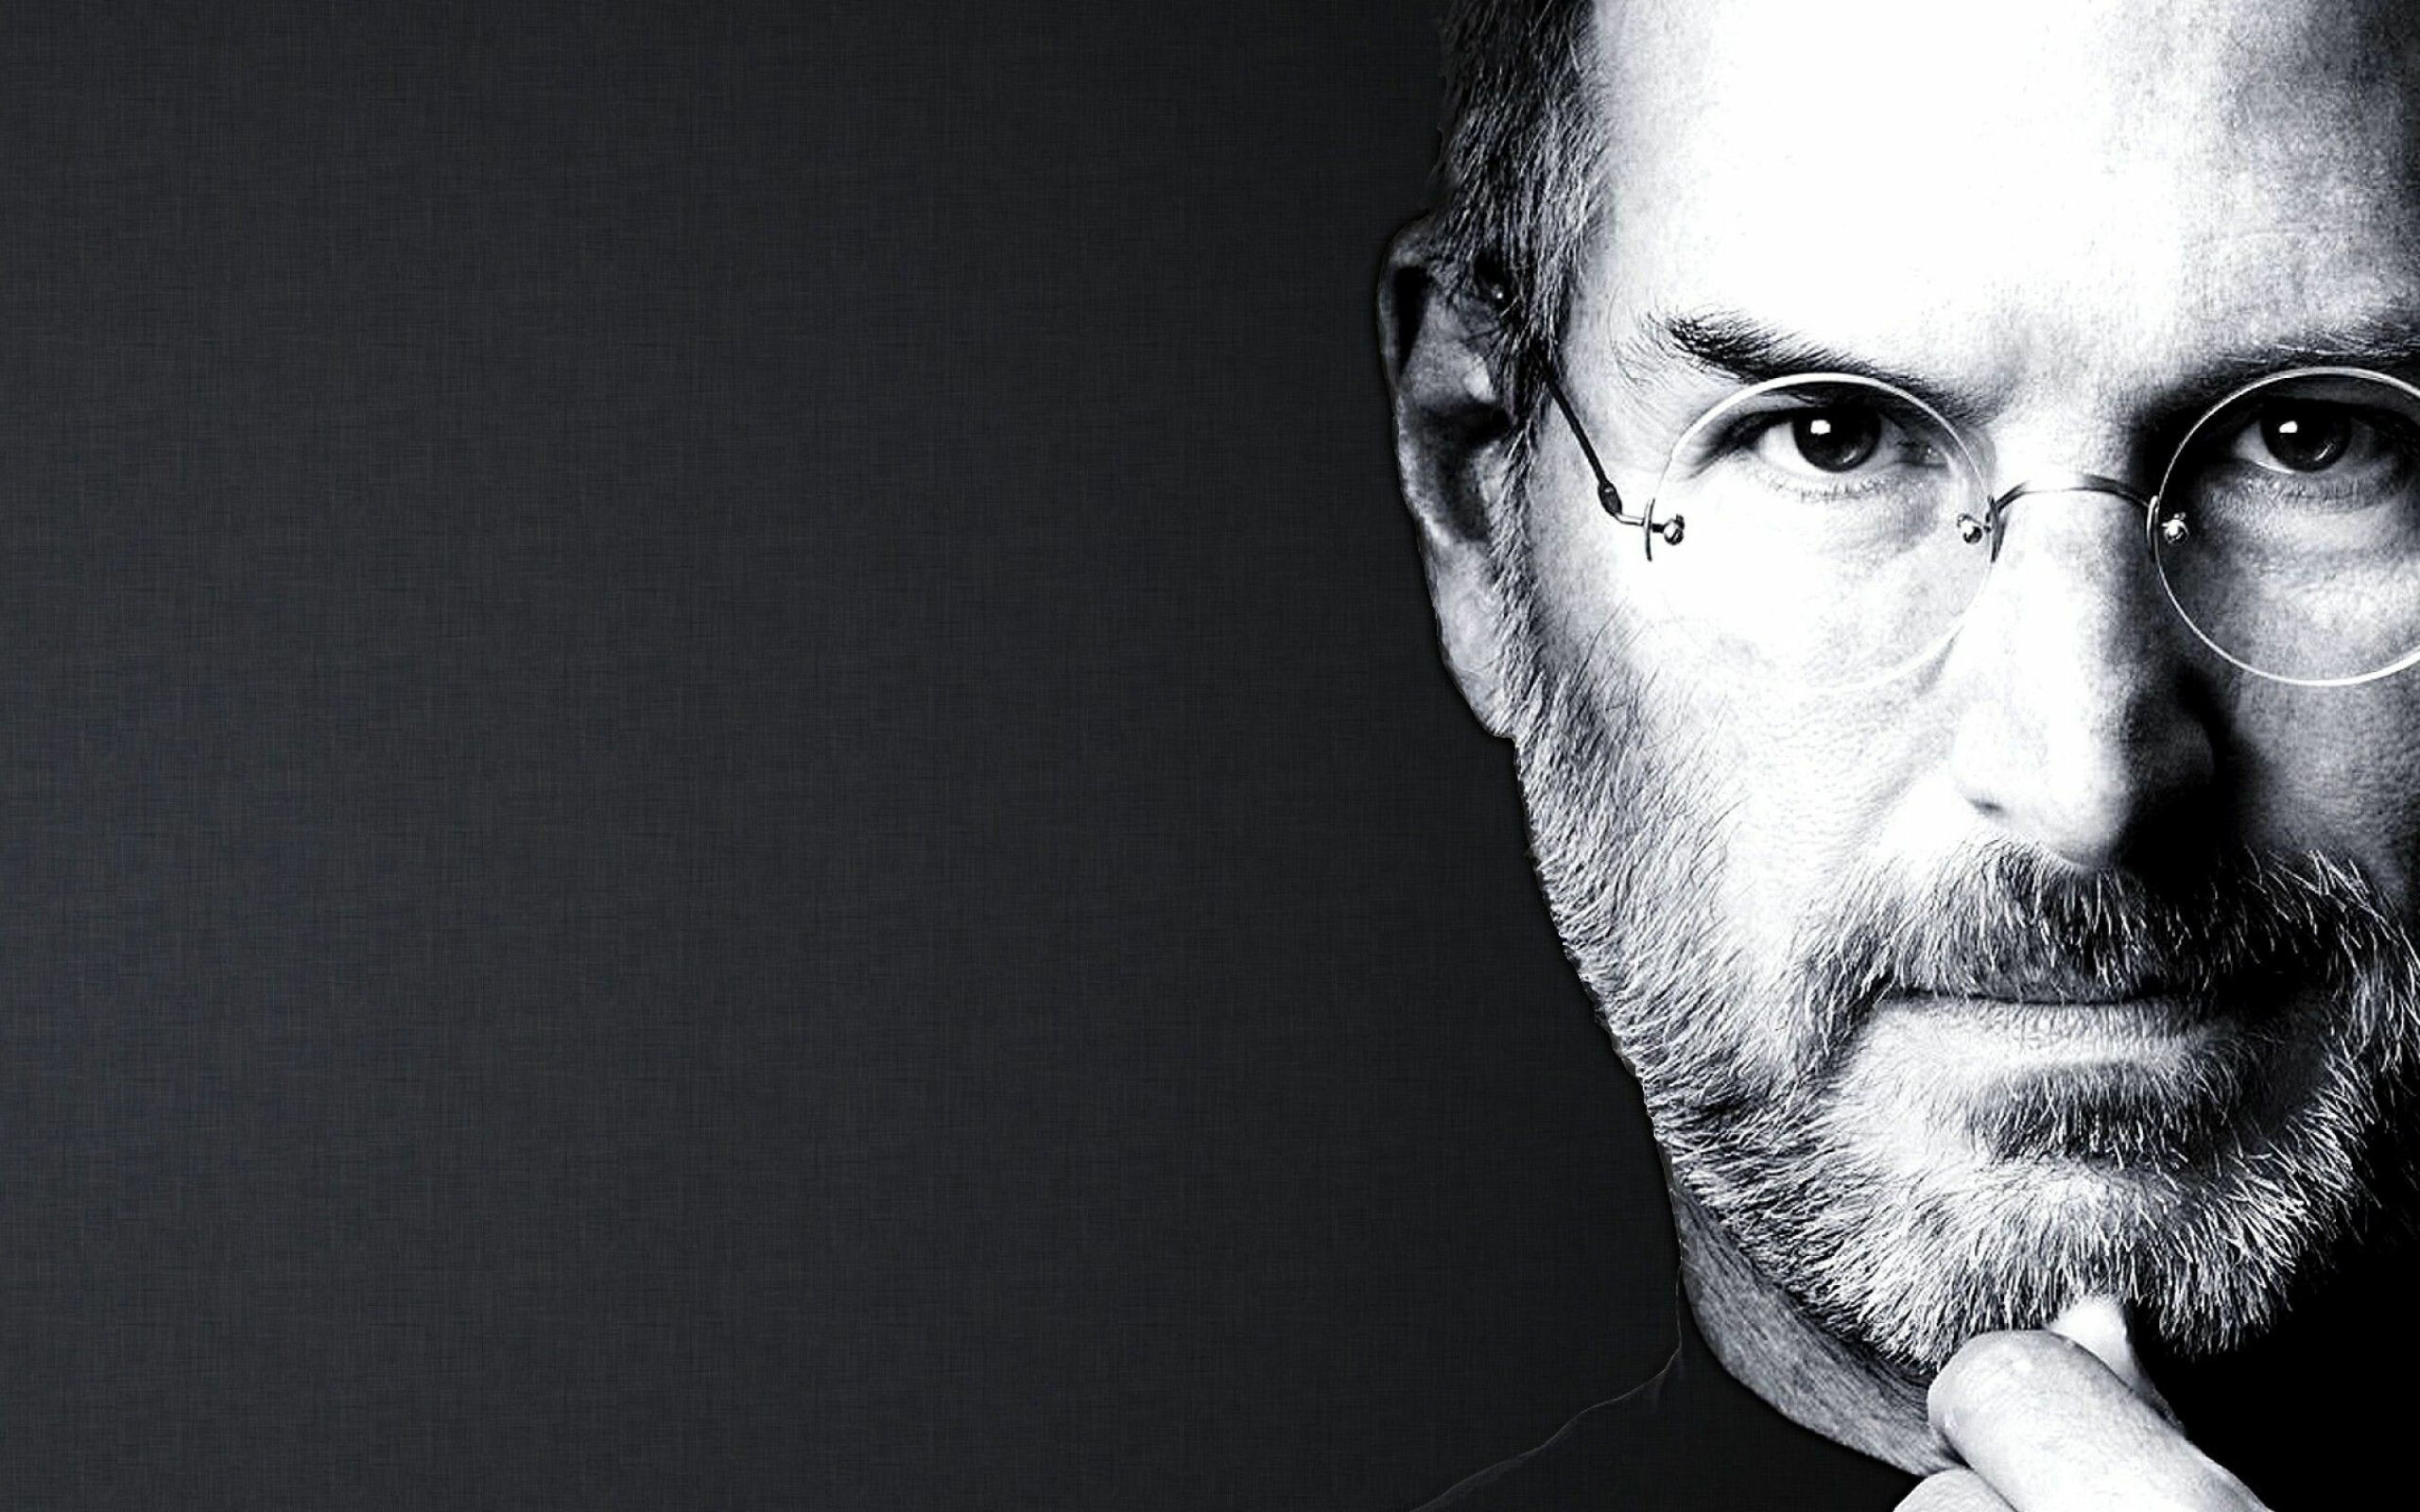 Steve Jobs: Received a number of honors for his influence in the technology, iMac, iTunes, iPod, iPhone, Monochrome. 2560x1600 HD Background.